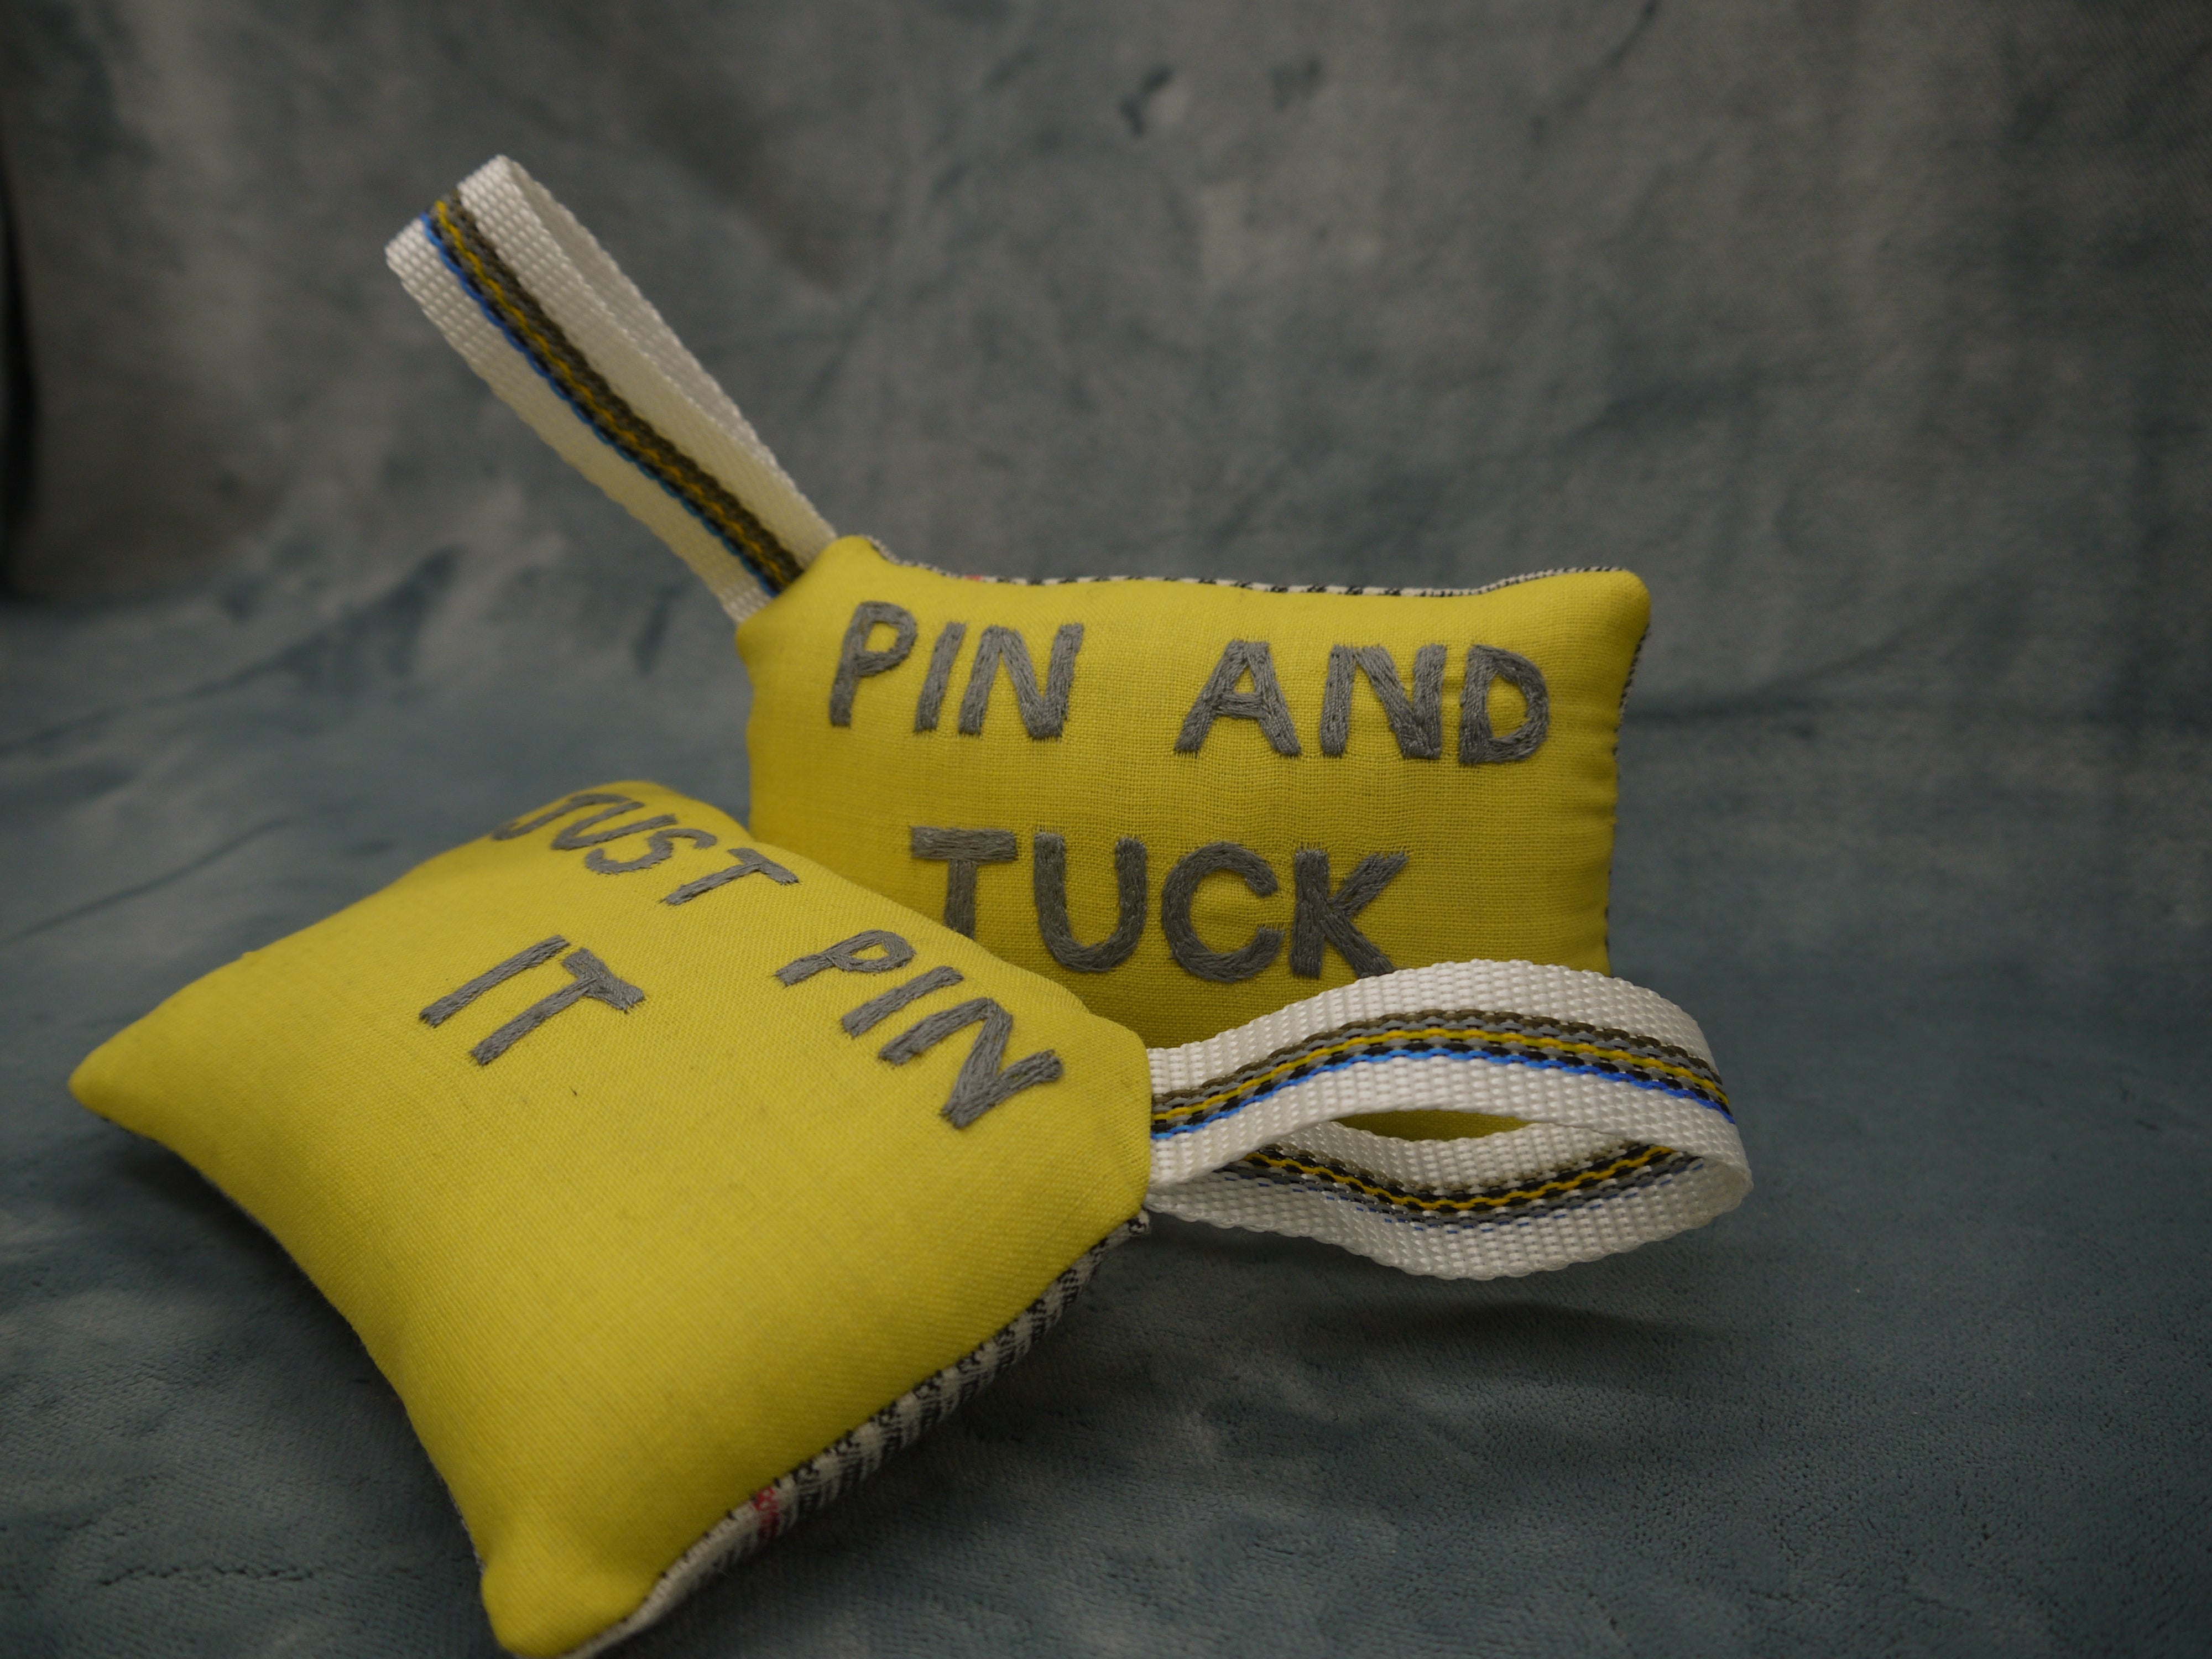 Pin cushion in yellow and grey wool, superfine 120, Pin and Tuck Embroidered by hand in grey on a yellow background, Nylon wriststrap with yellow/blue go stripe, Prince of Wales wool backing in white and black